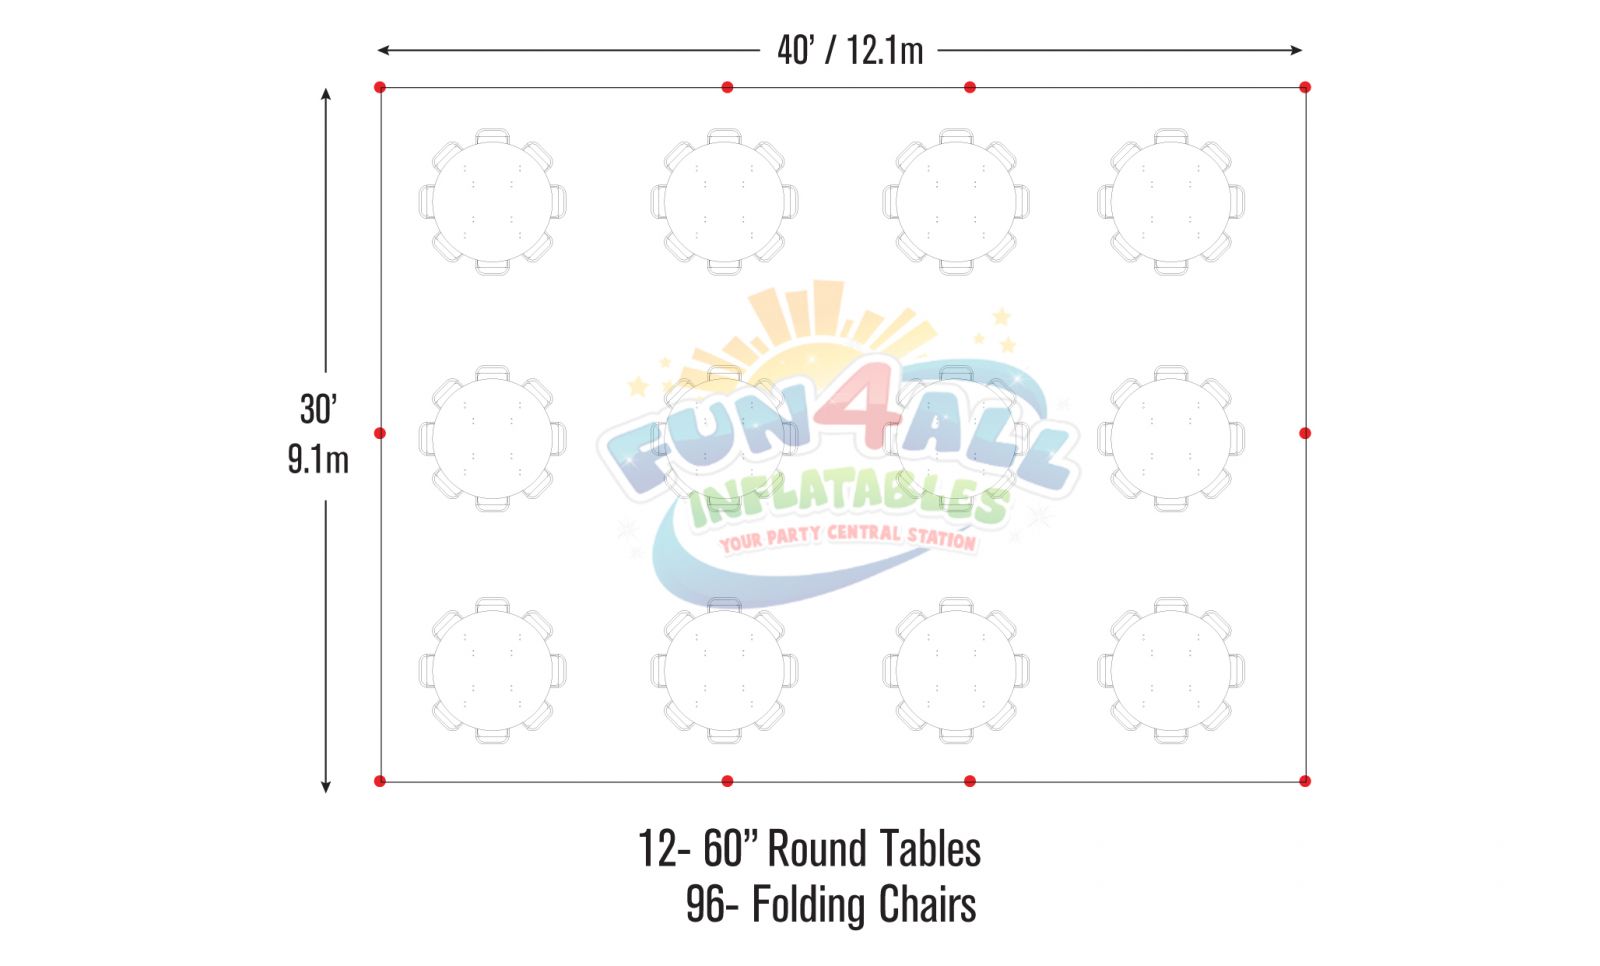 30x40 frame tent seating chart seating for 96